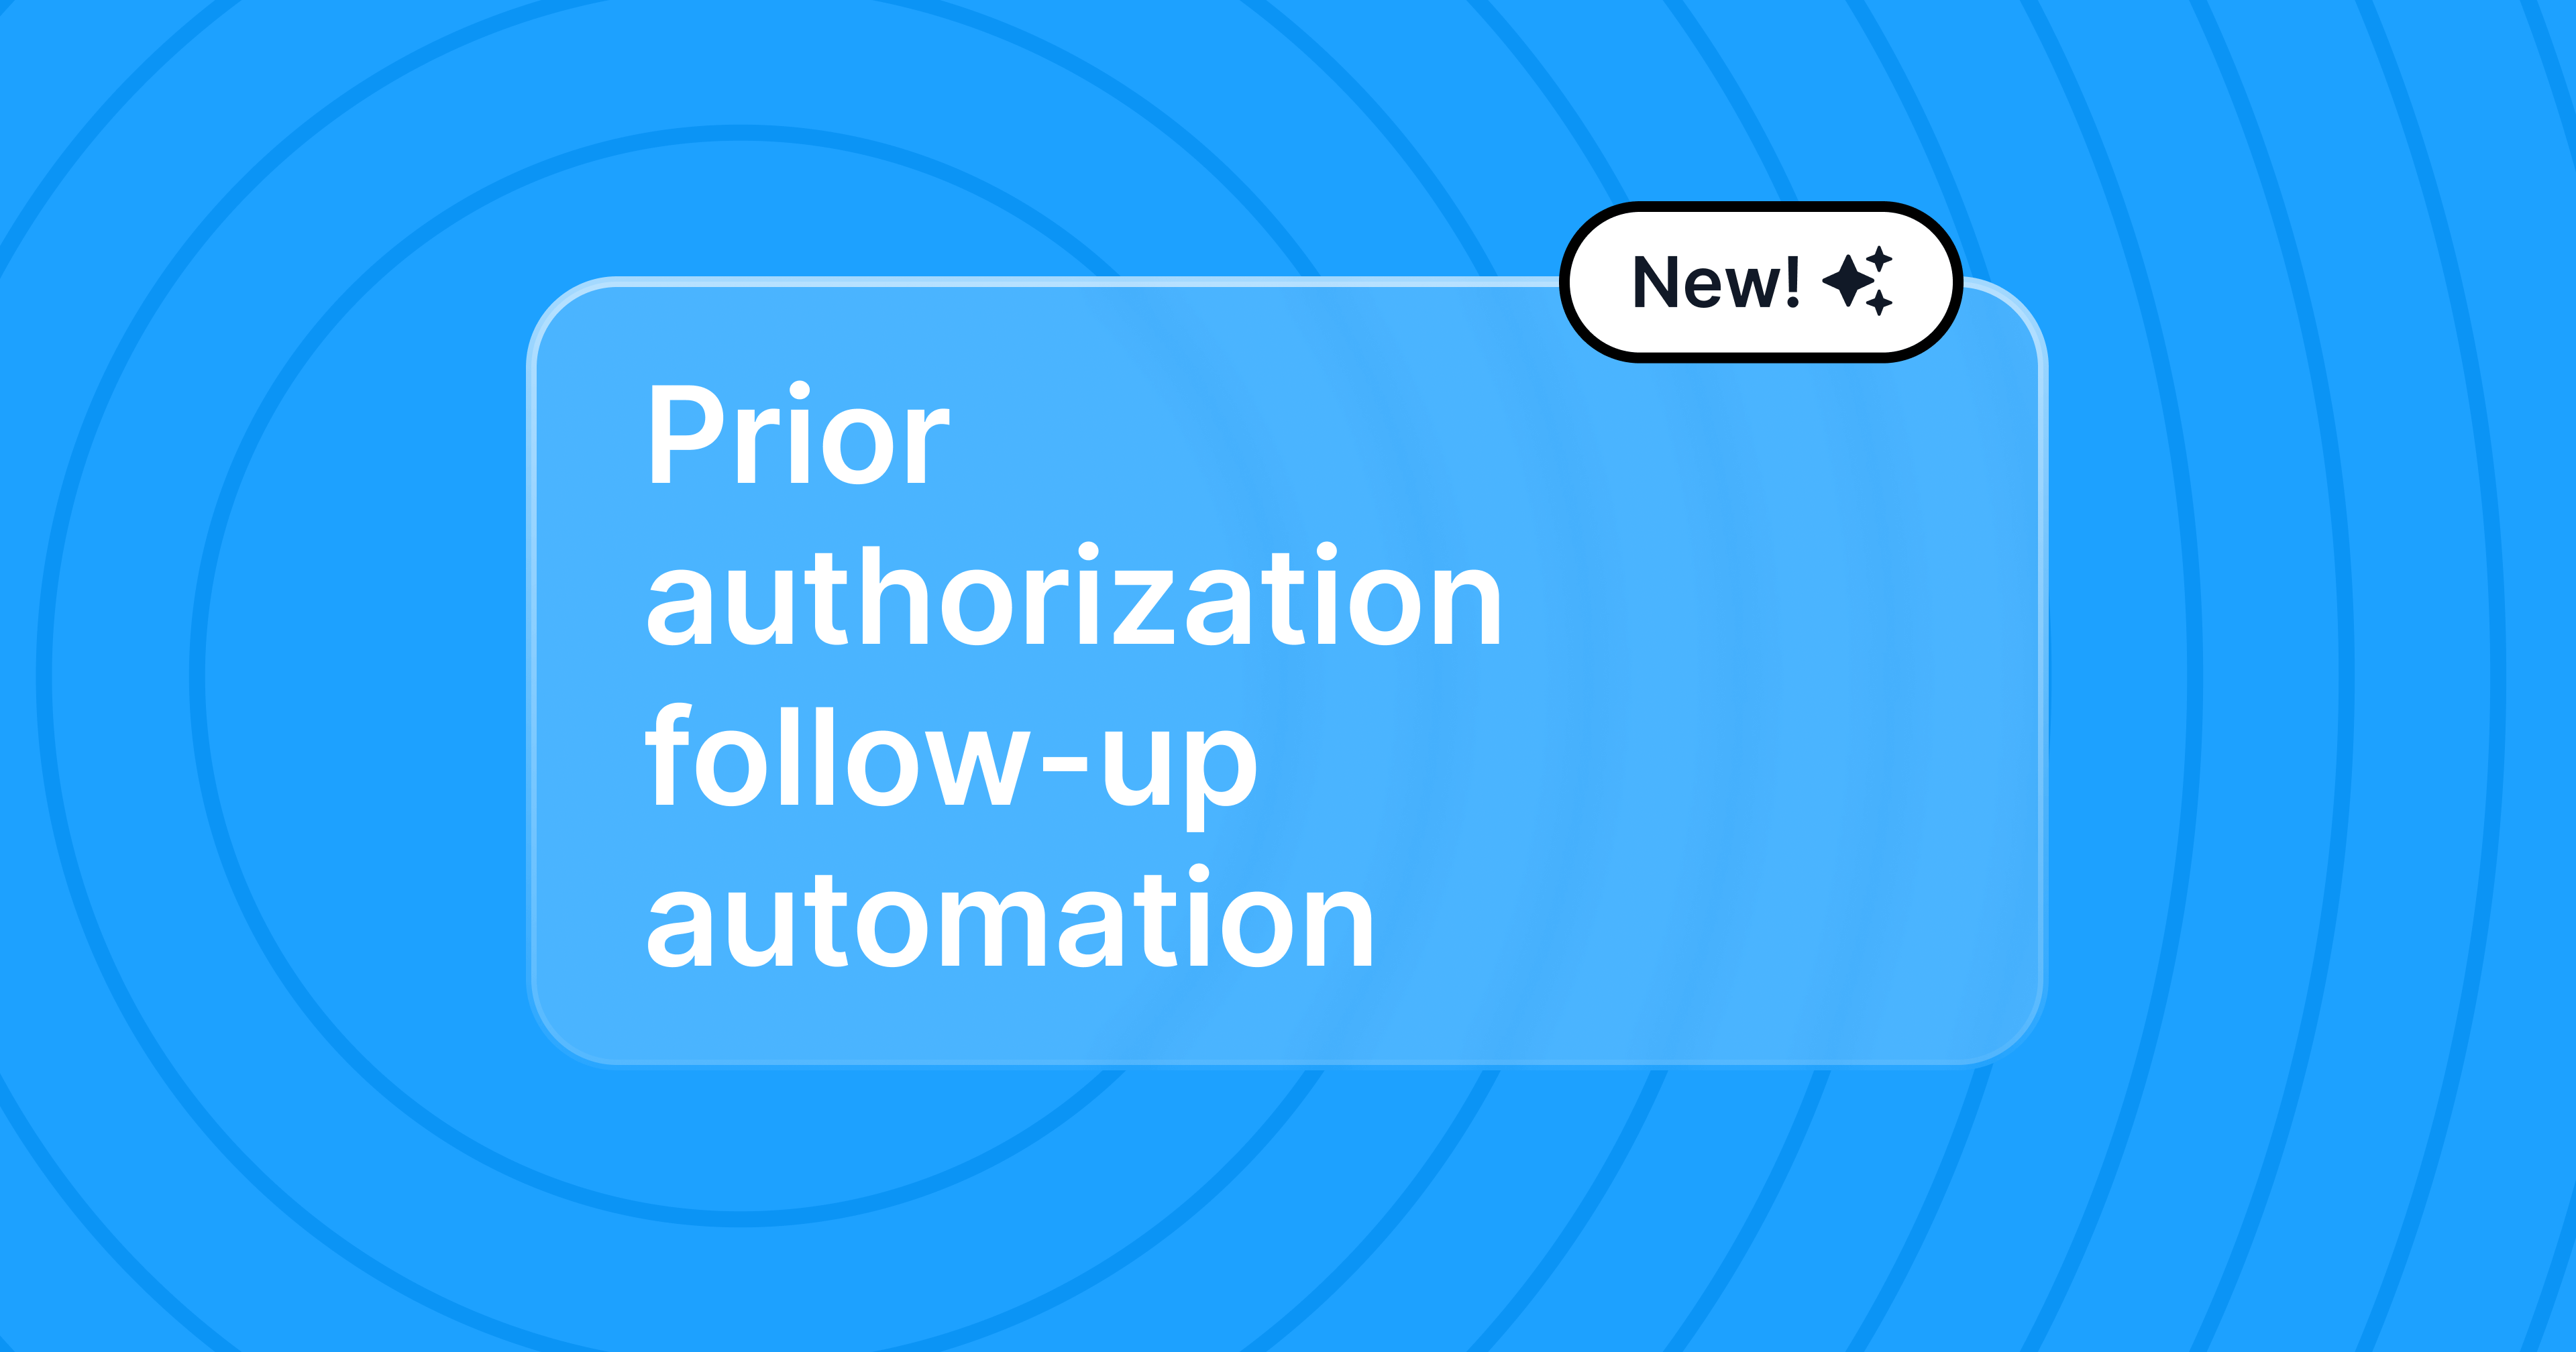 Product announcement about prior authorization follow up automation